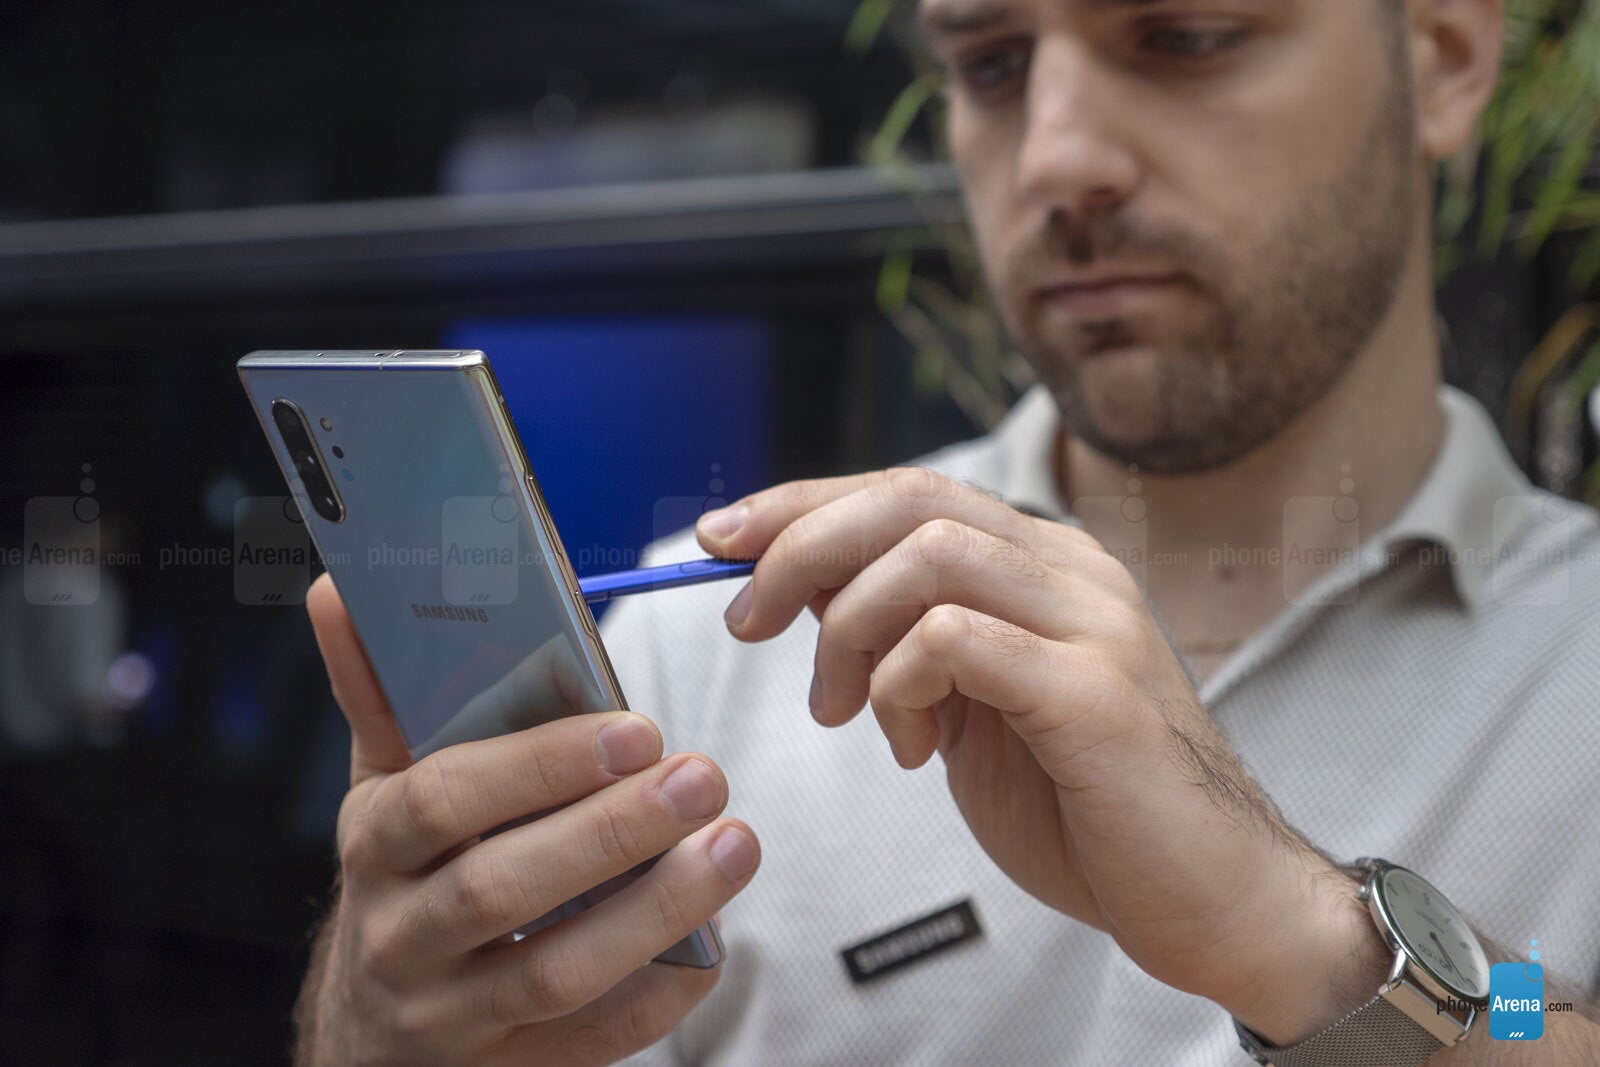 Samsung Galaxy Note 10/10+ are Android refined to perfection, but no great risks taken (hands-on)